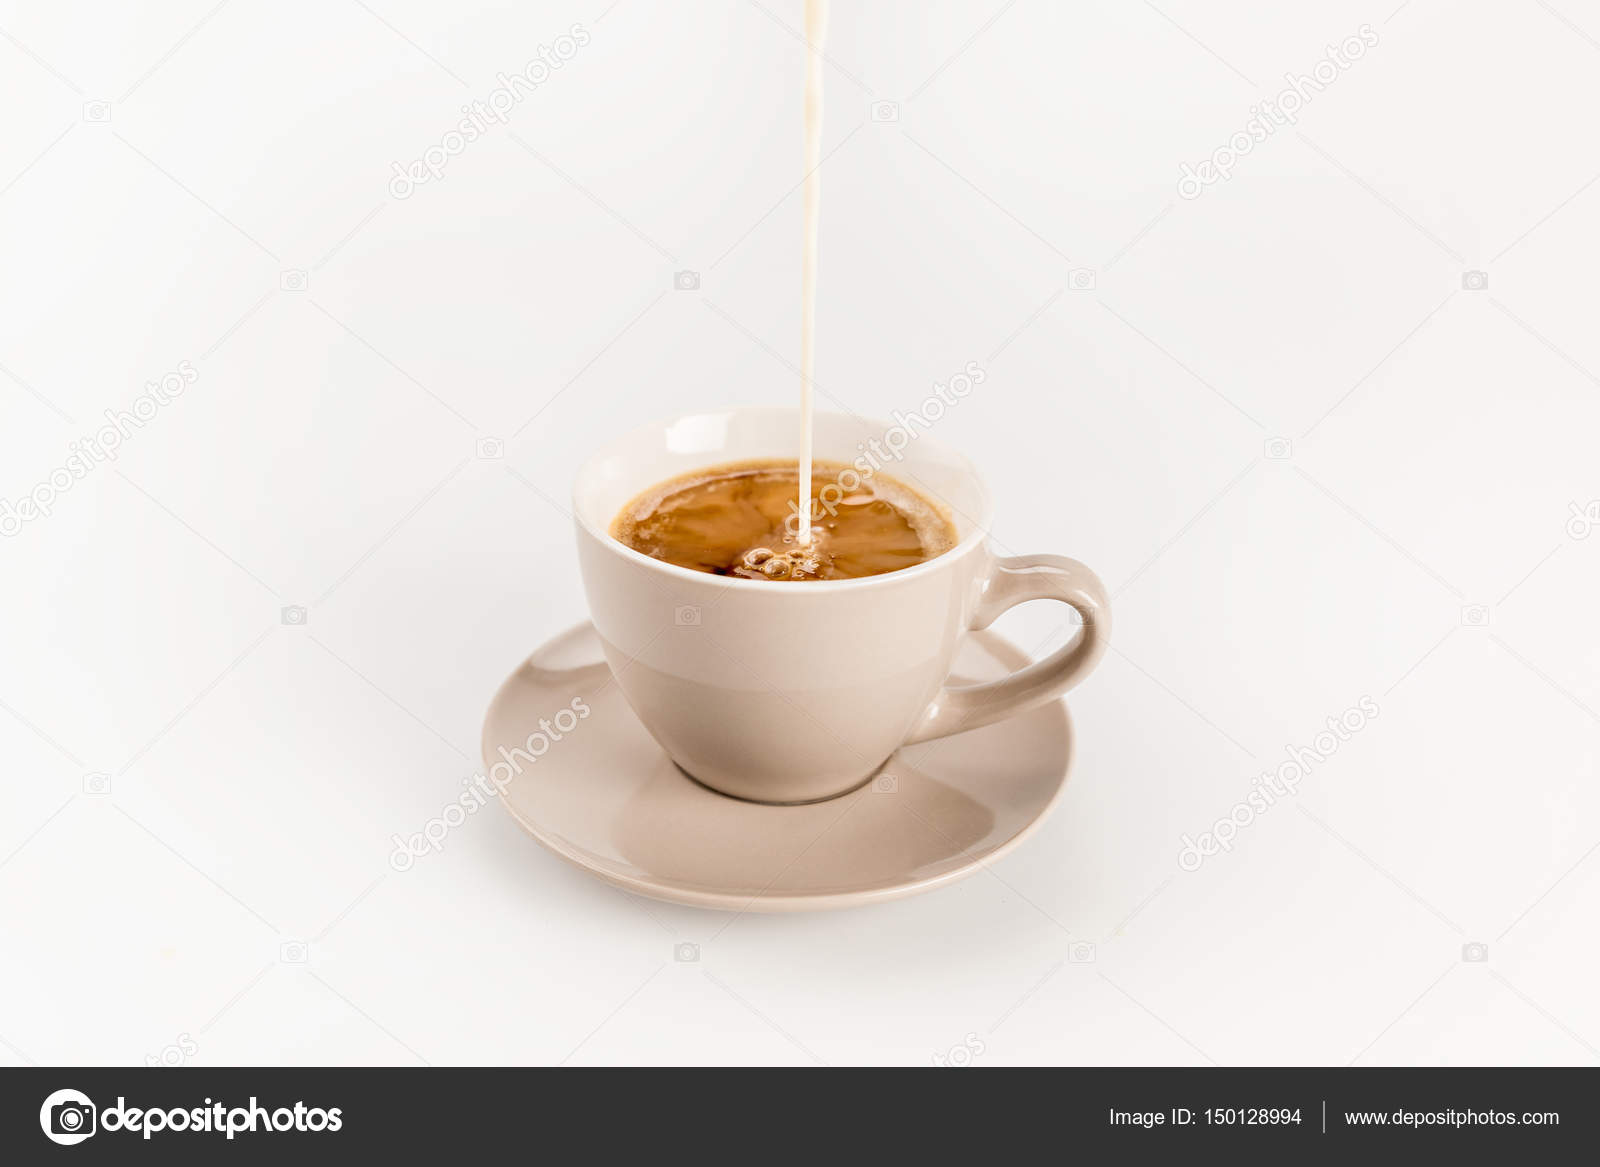 Stop Pouring Into Cups Print